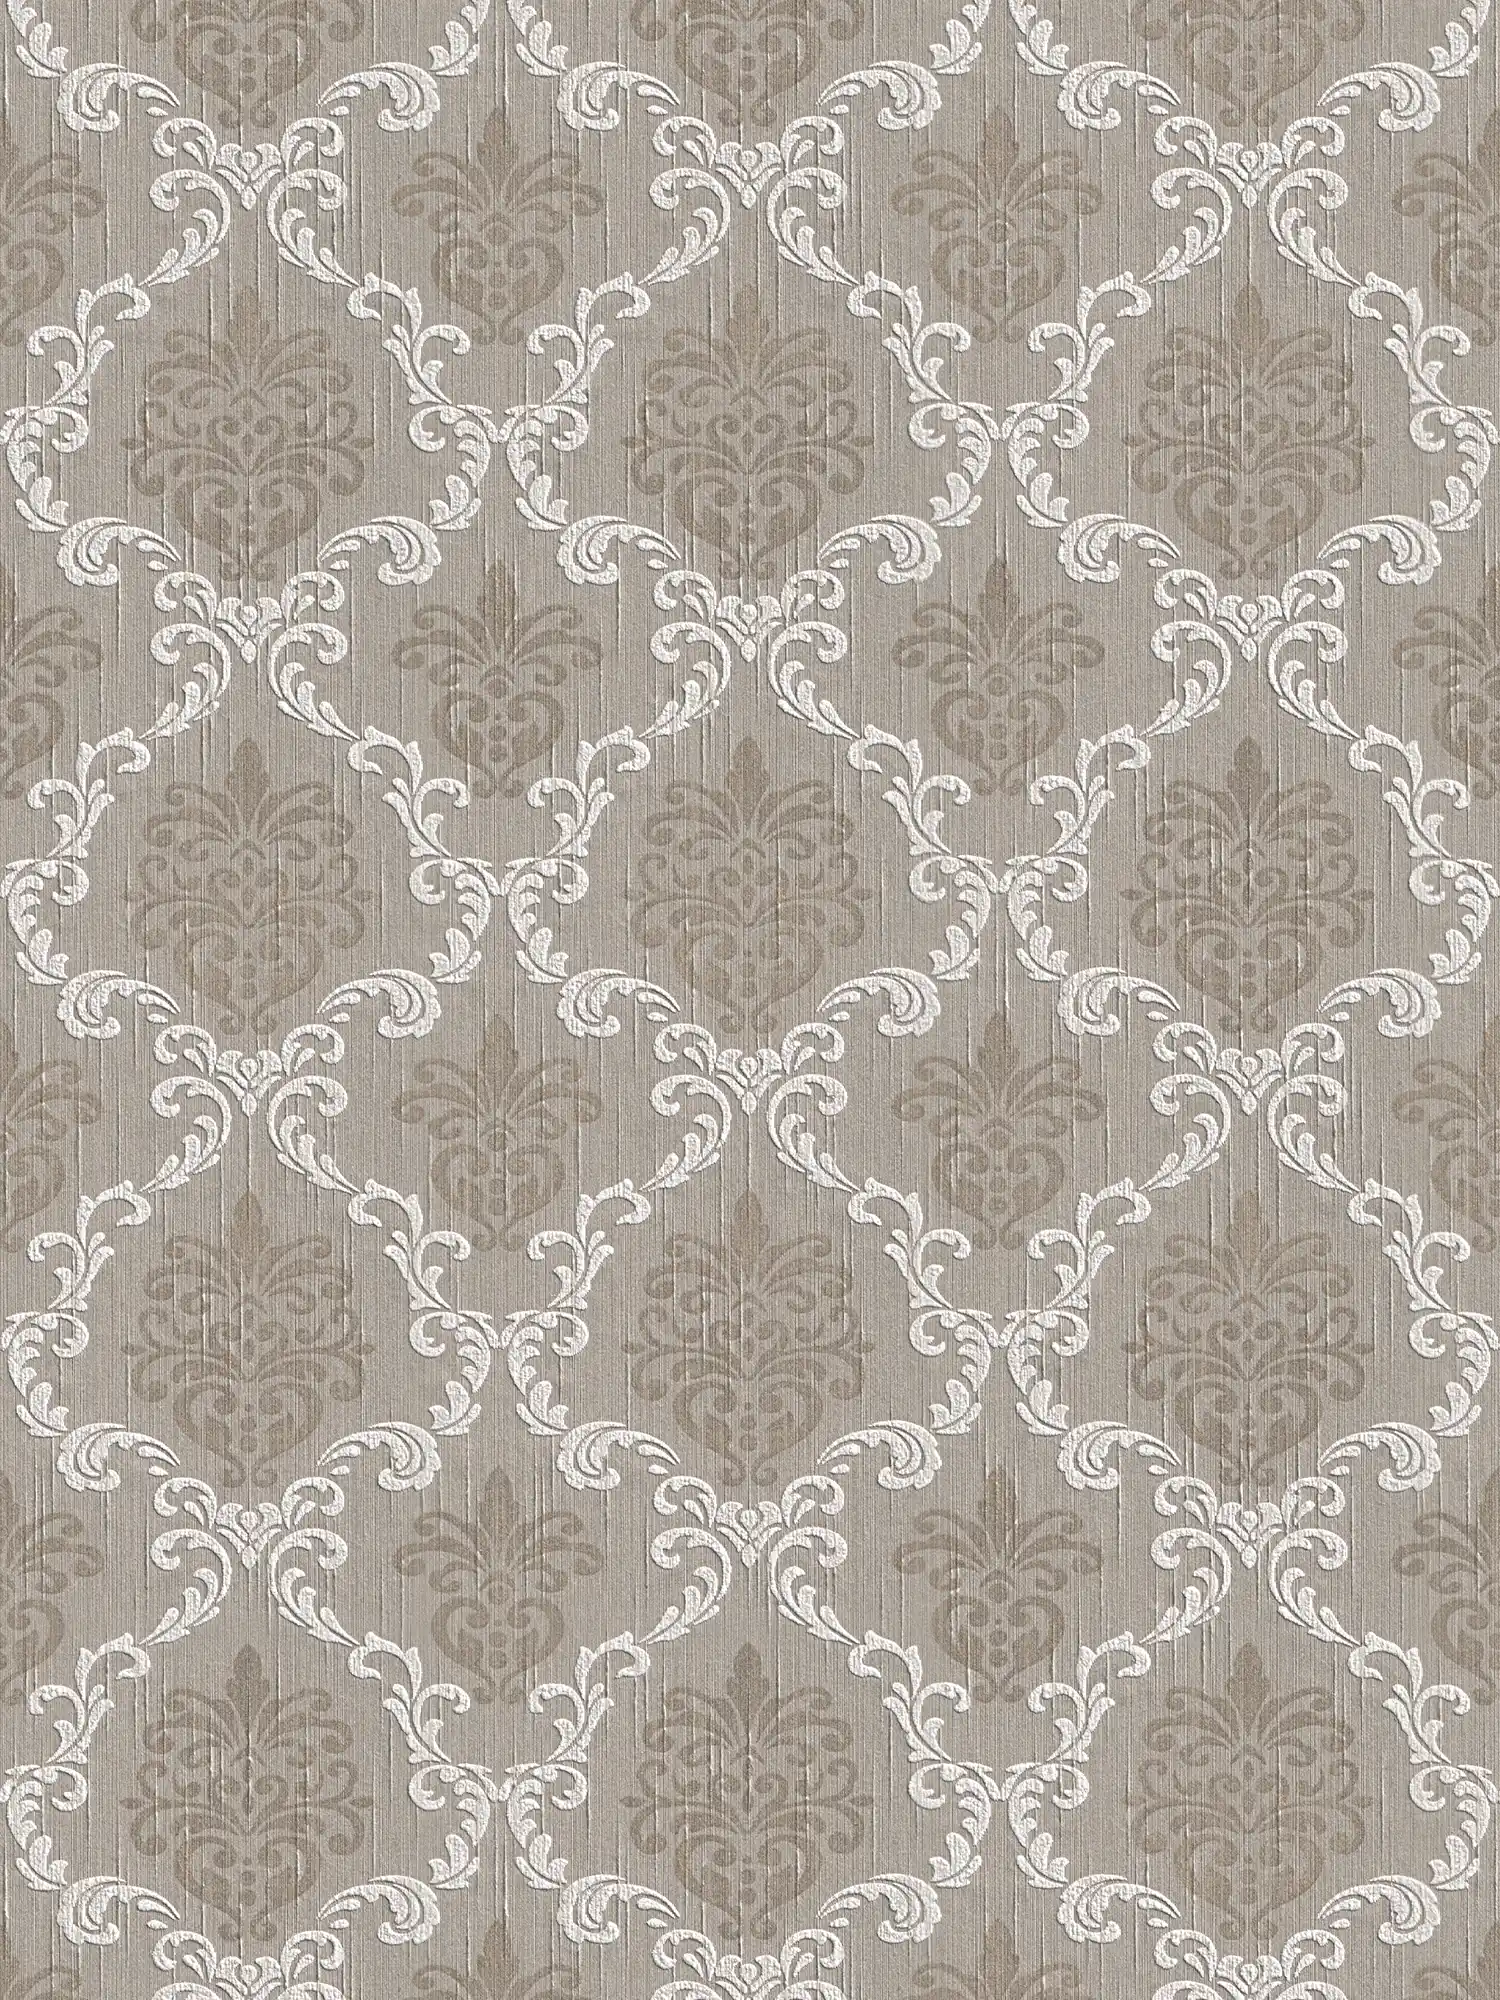 Non-woven wallpaper with ornament design in colonial style - beige, grey
